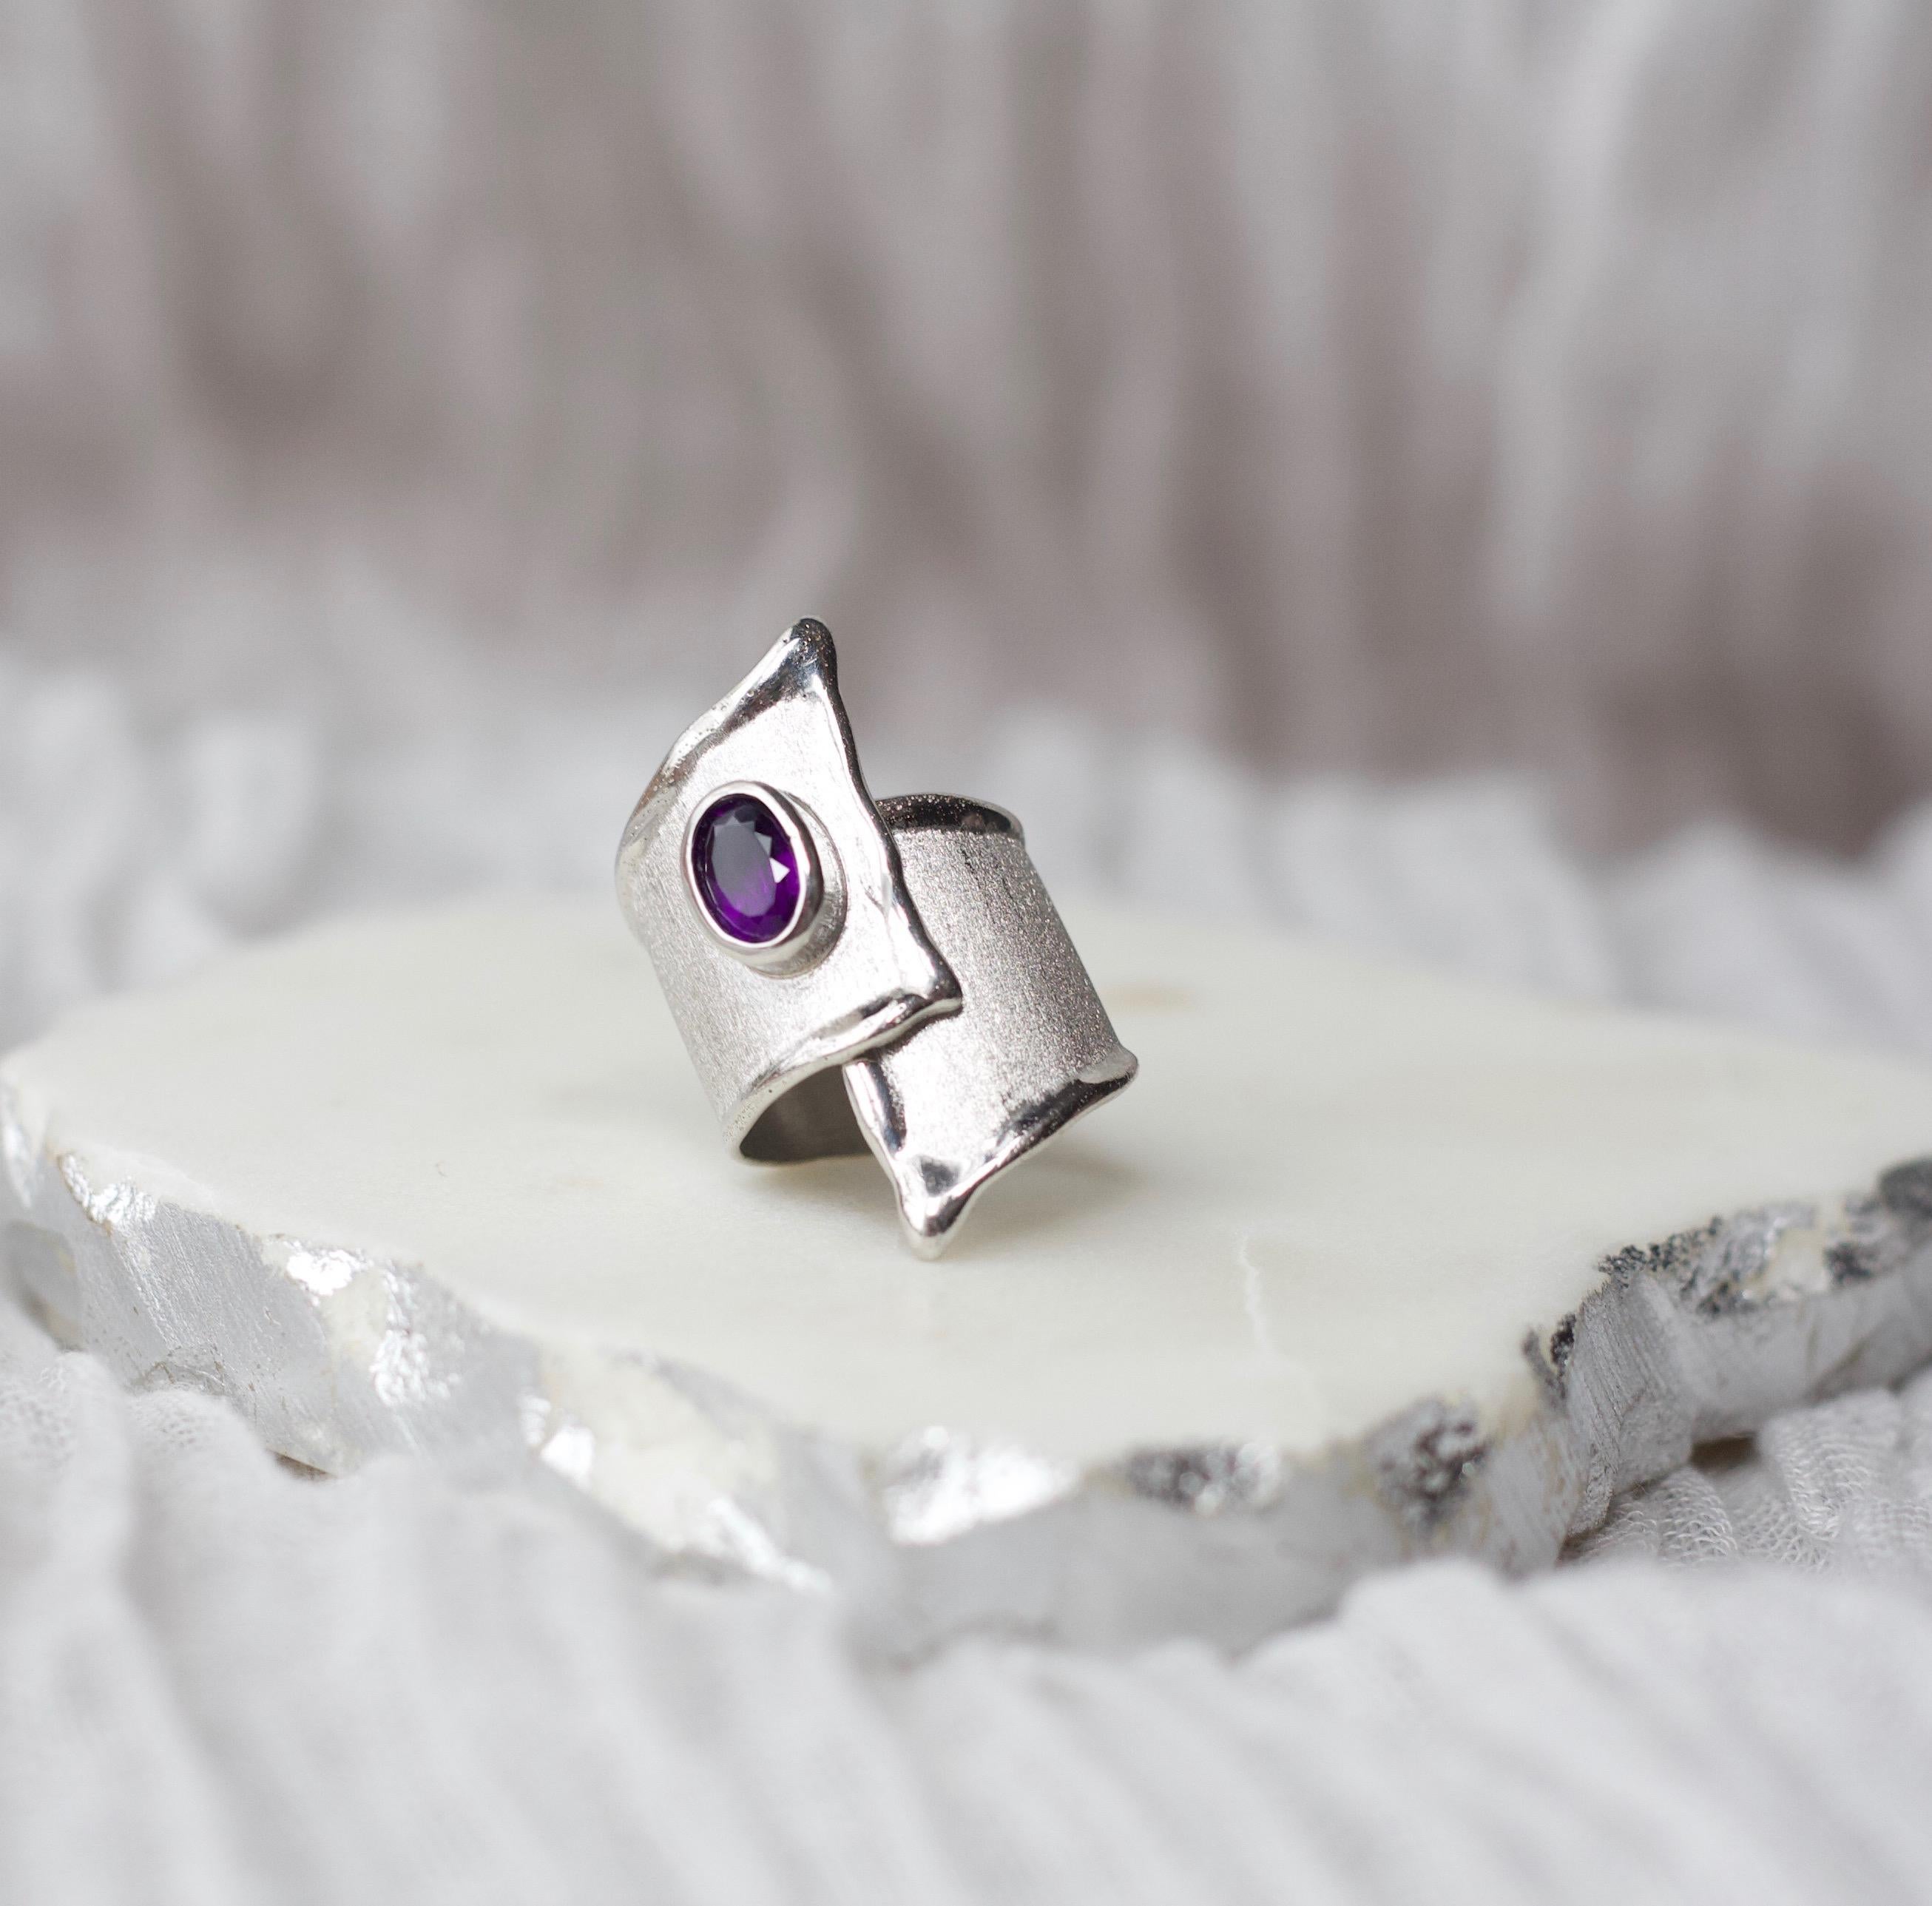 This is Yianni Creations adjustable ring from Ammos Collection all handcrafted from fine silver 950 purity and plated with palladium to resist the elements. The ring features 1.25-carat oval cut amethyst complemented by unique techniques of